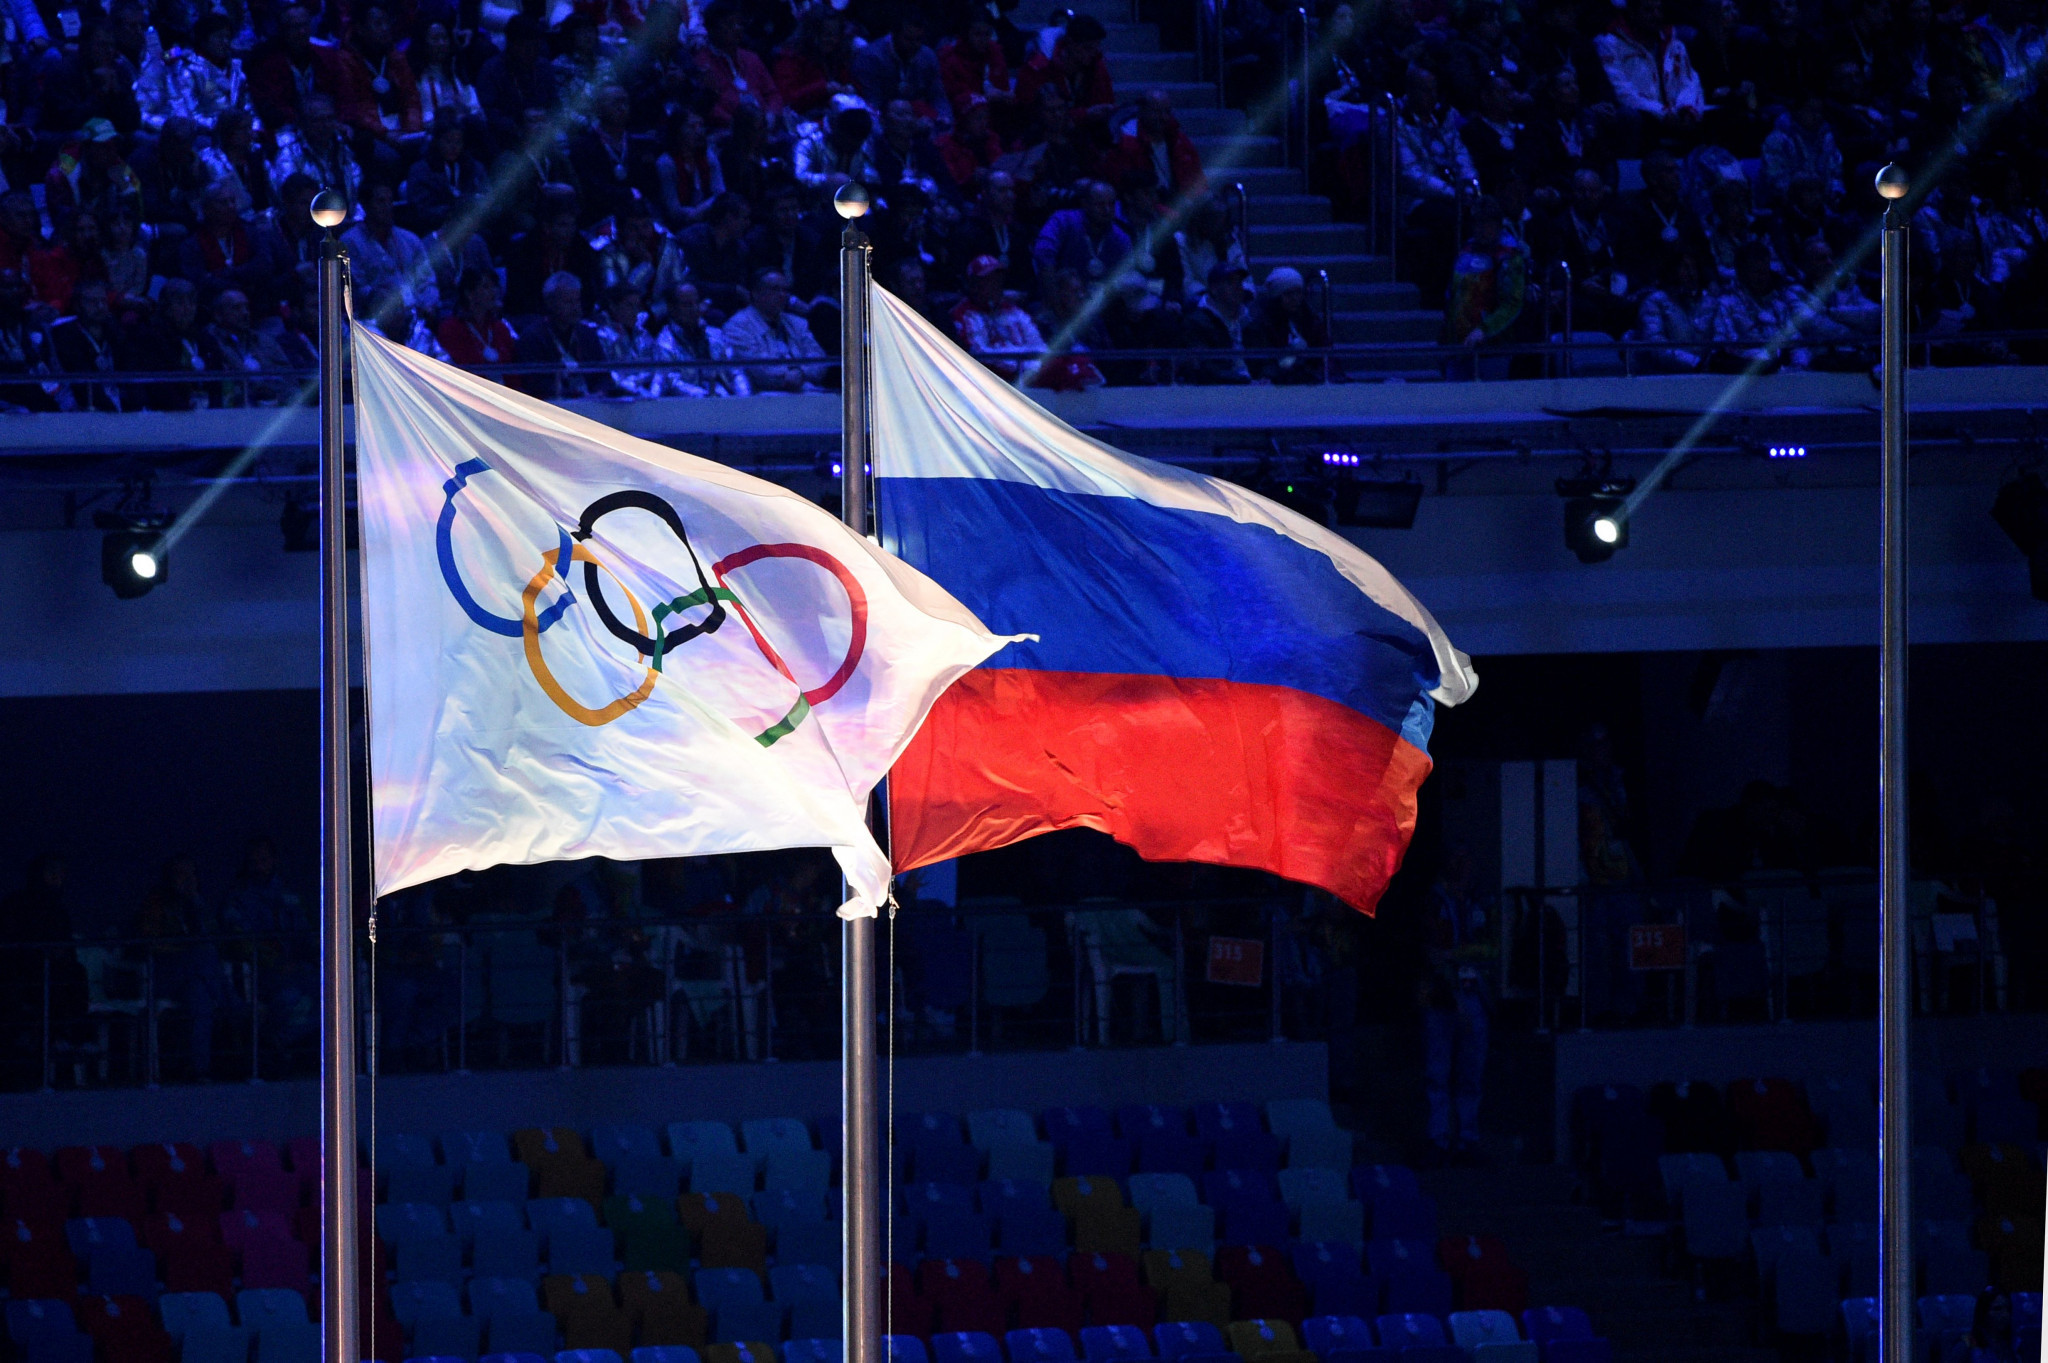 Russia's flag will not be able to be flown at the Olympics and Paralympics under the consequences announced by WADA ©Getty Images